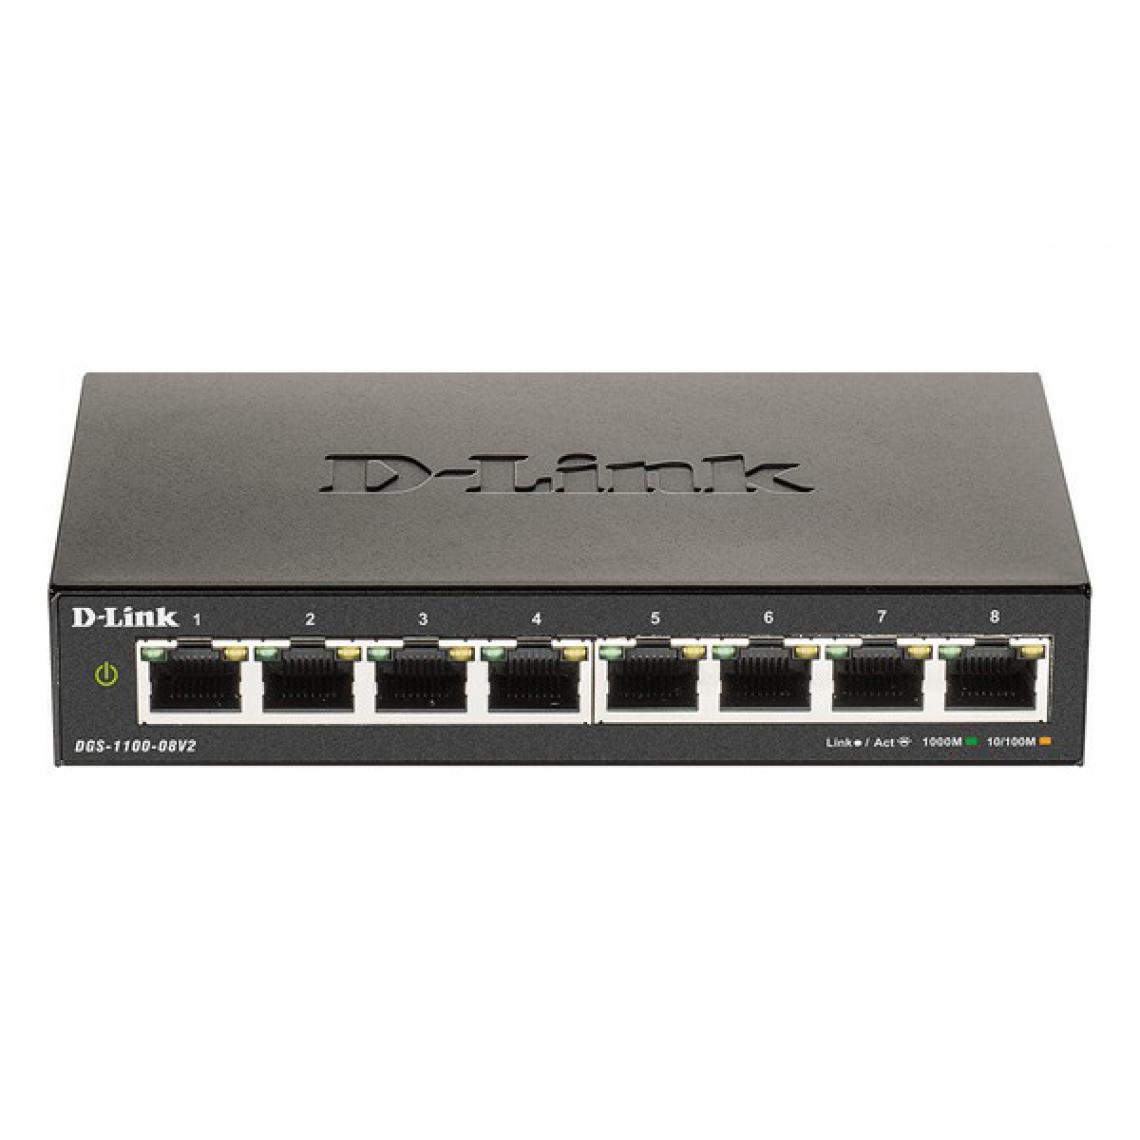 Unknown - Switch D-Link DGS-1100-08V2 8xGbE - Switch